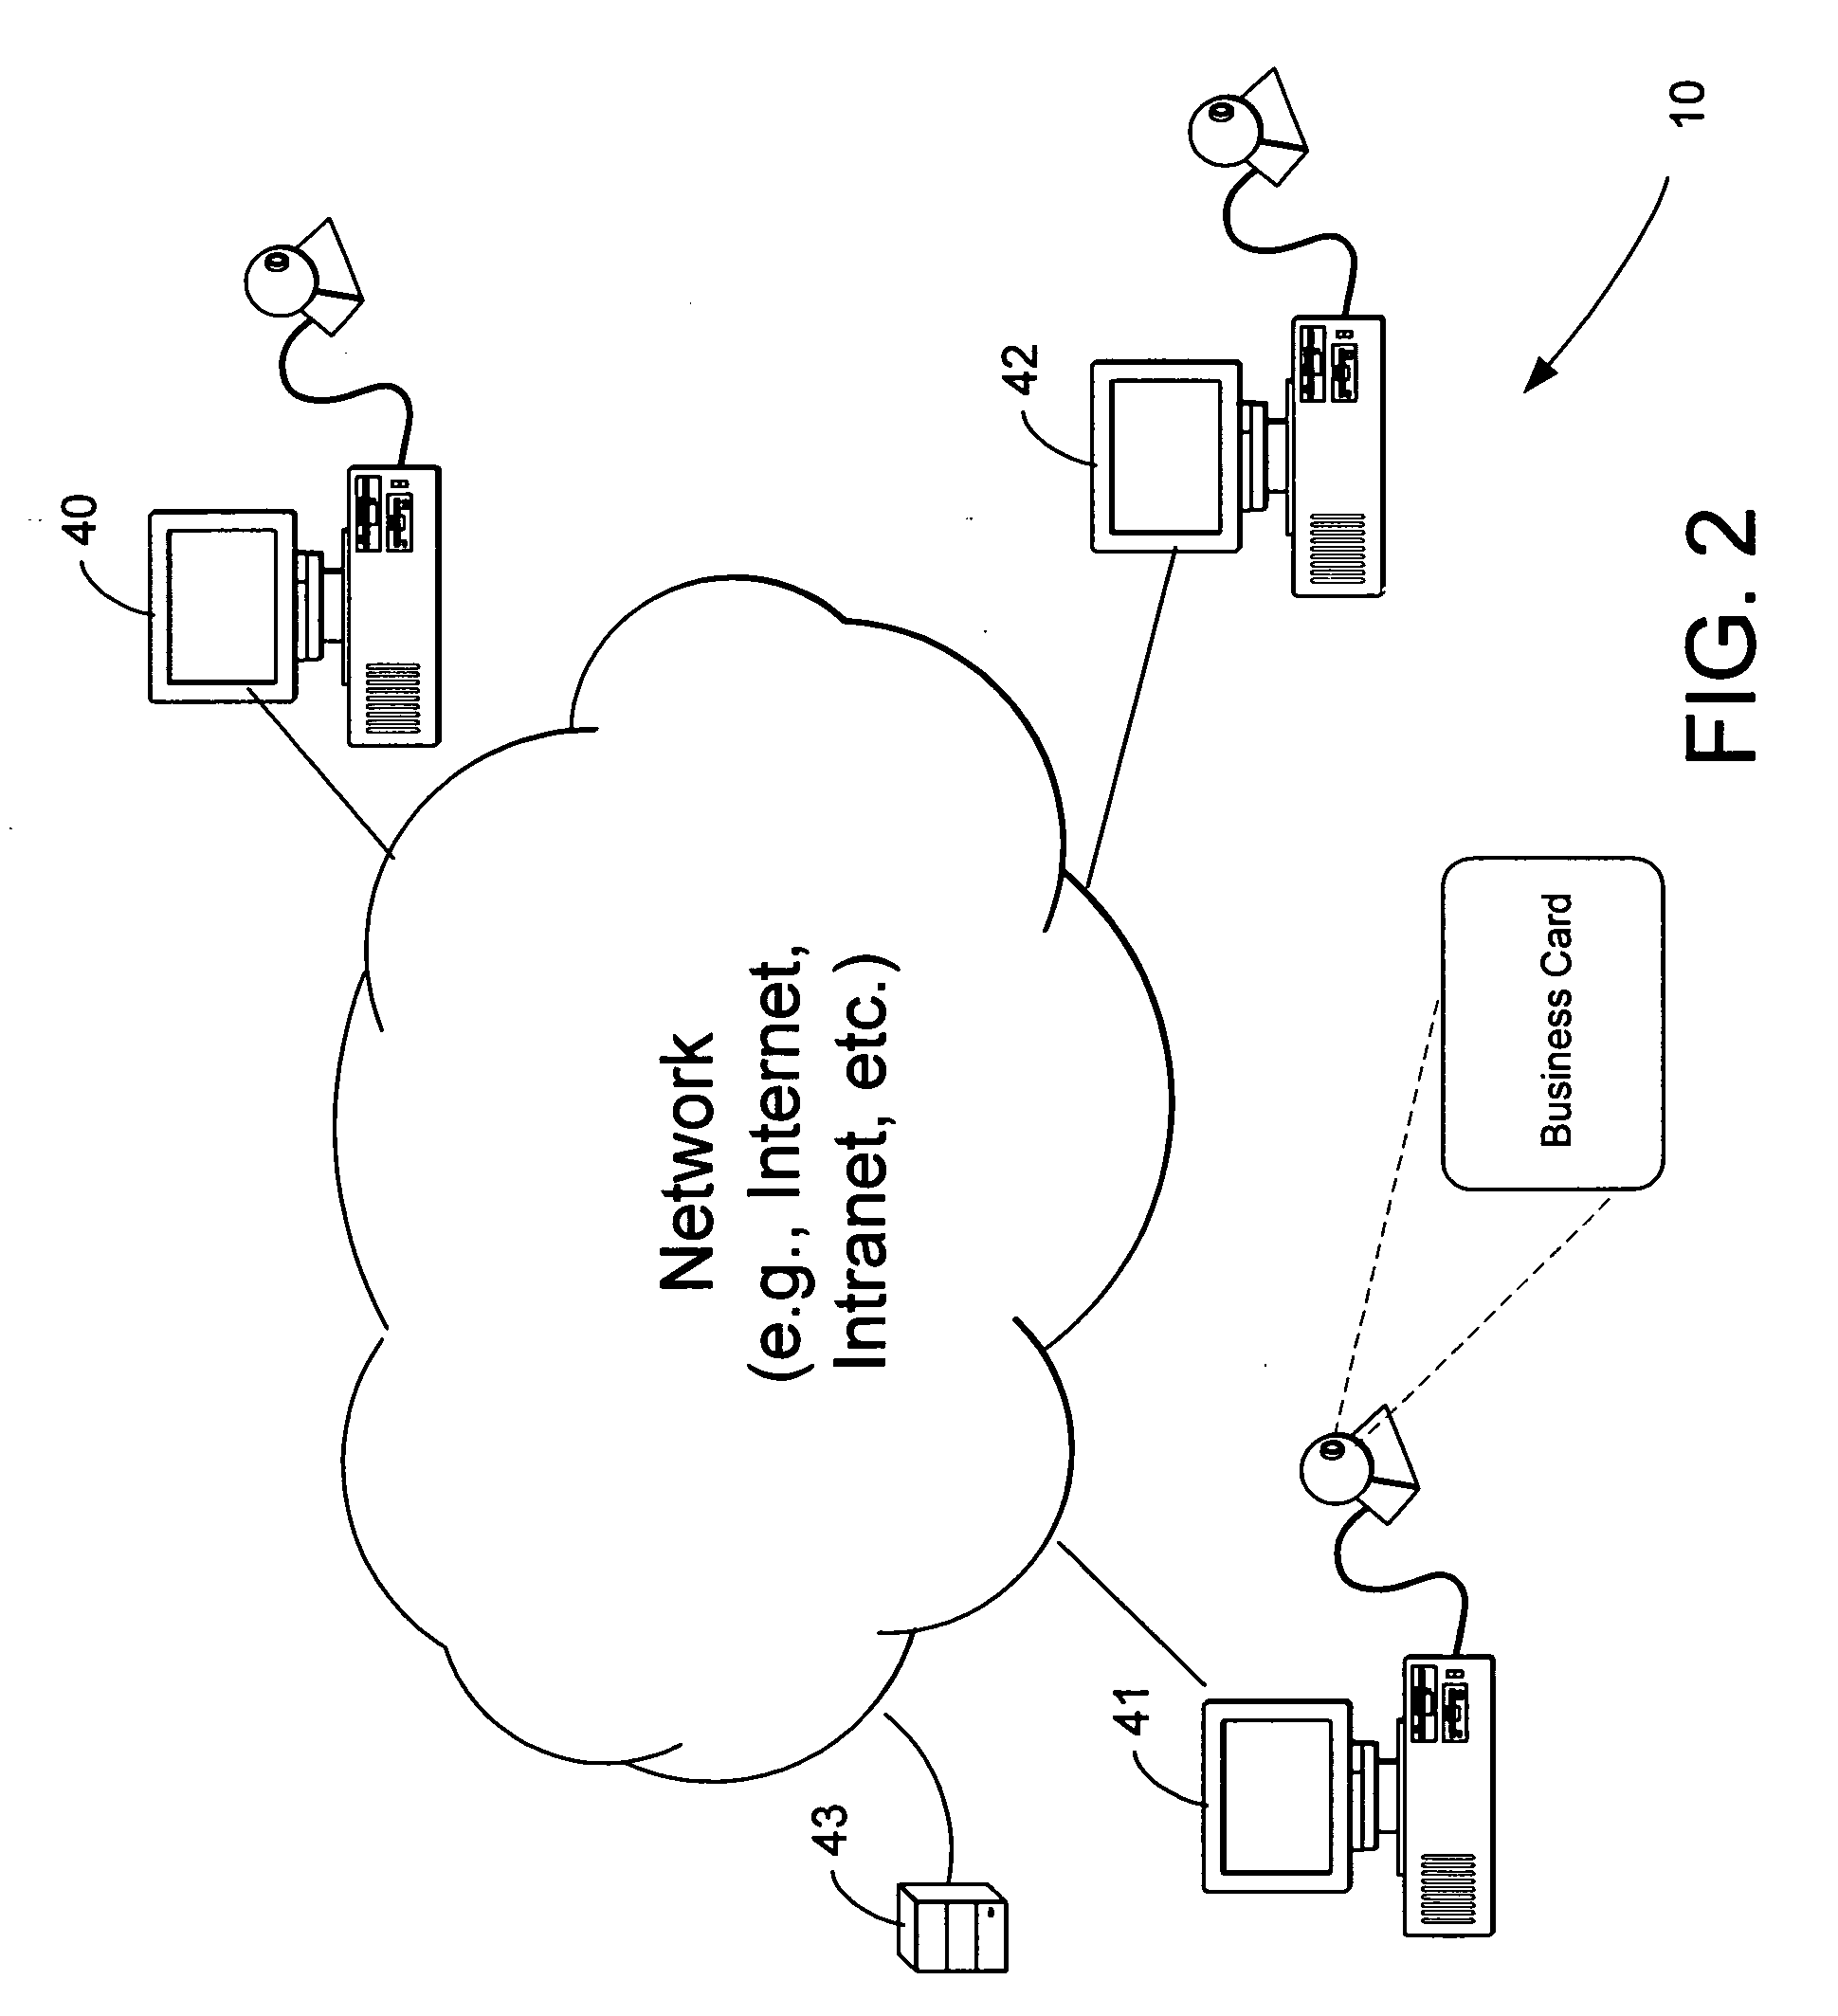 Paper-based control of computer systems